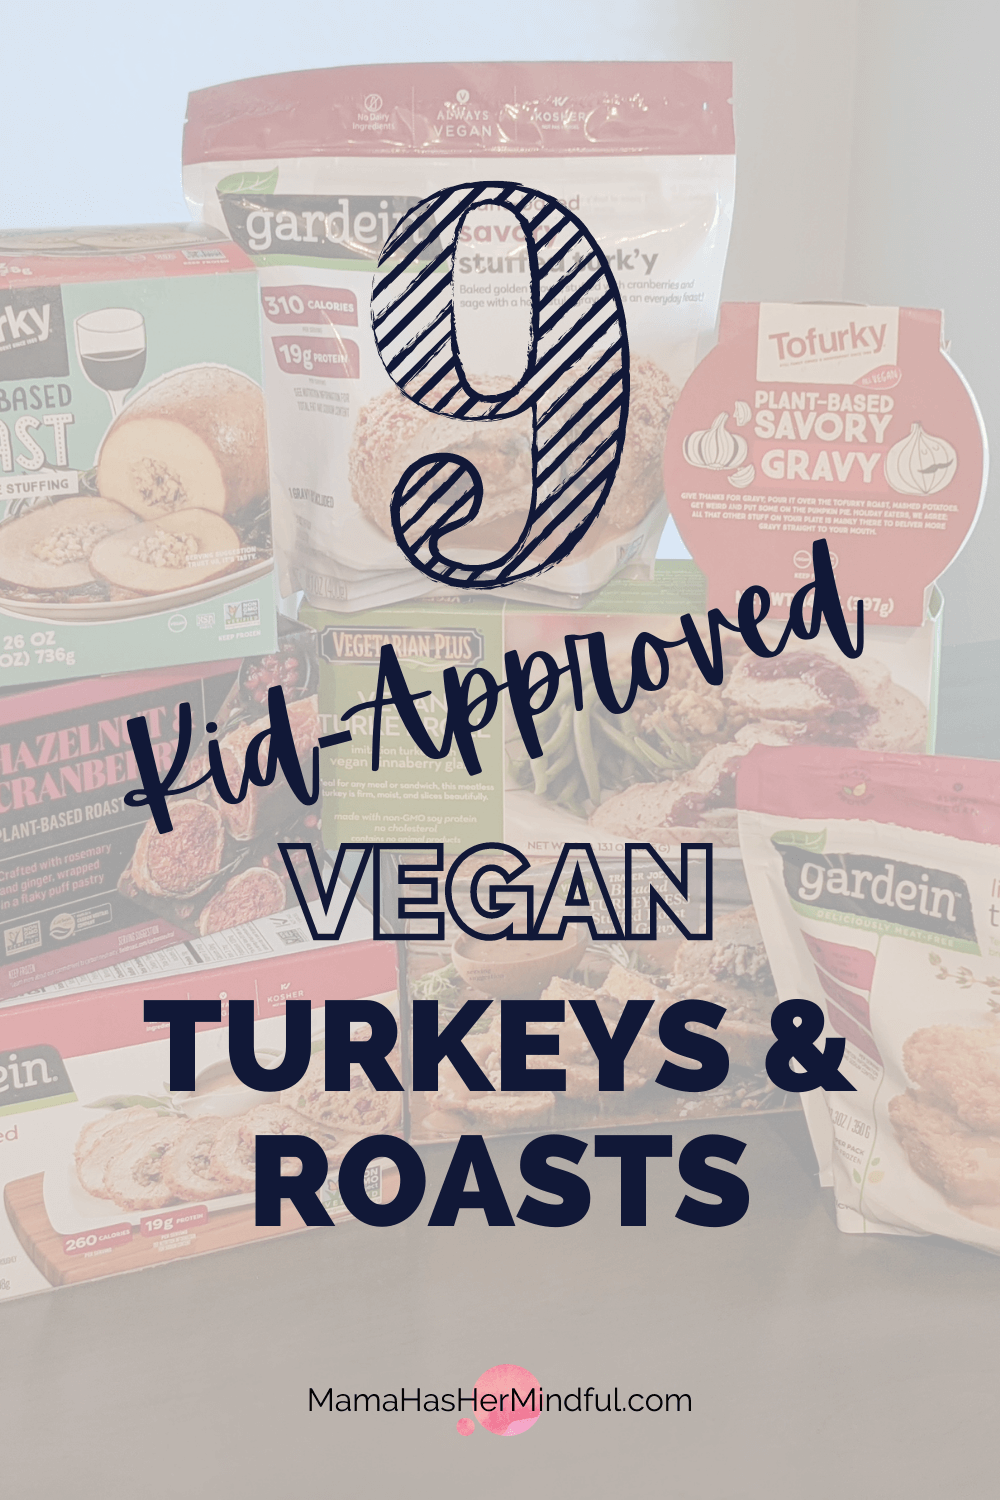 We Tried 9 Vegan Turkeys and Roasts - Here Are Our Favorites